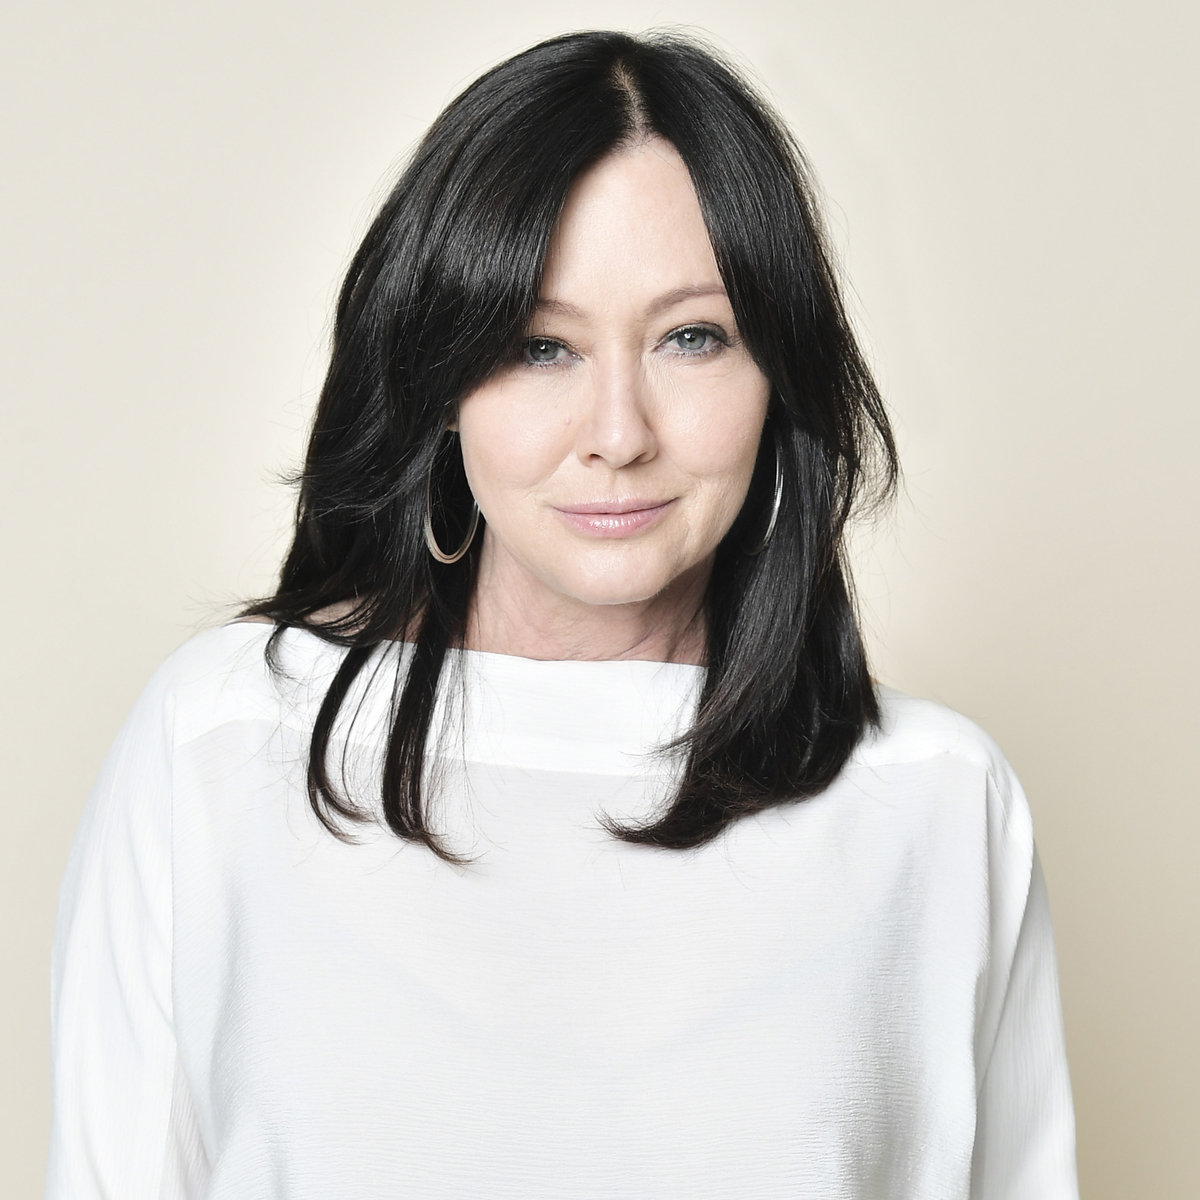 Shannen Doherty Shares She Completed This “Bucket List” Activity